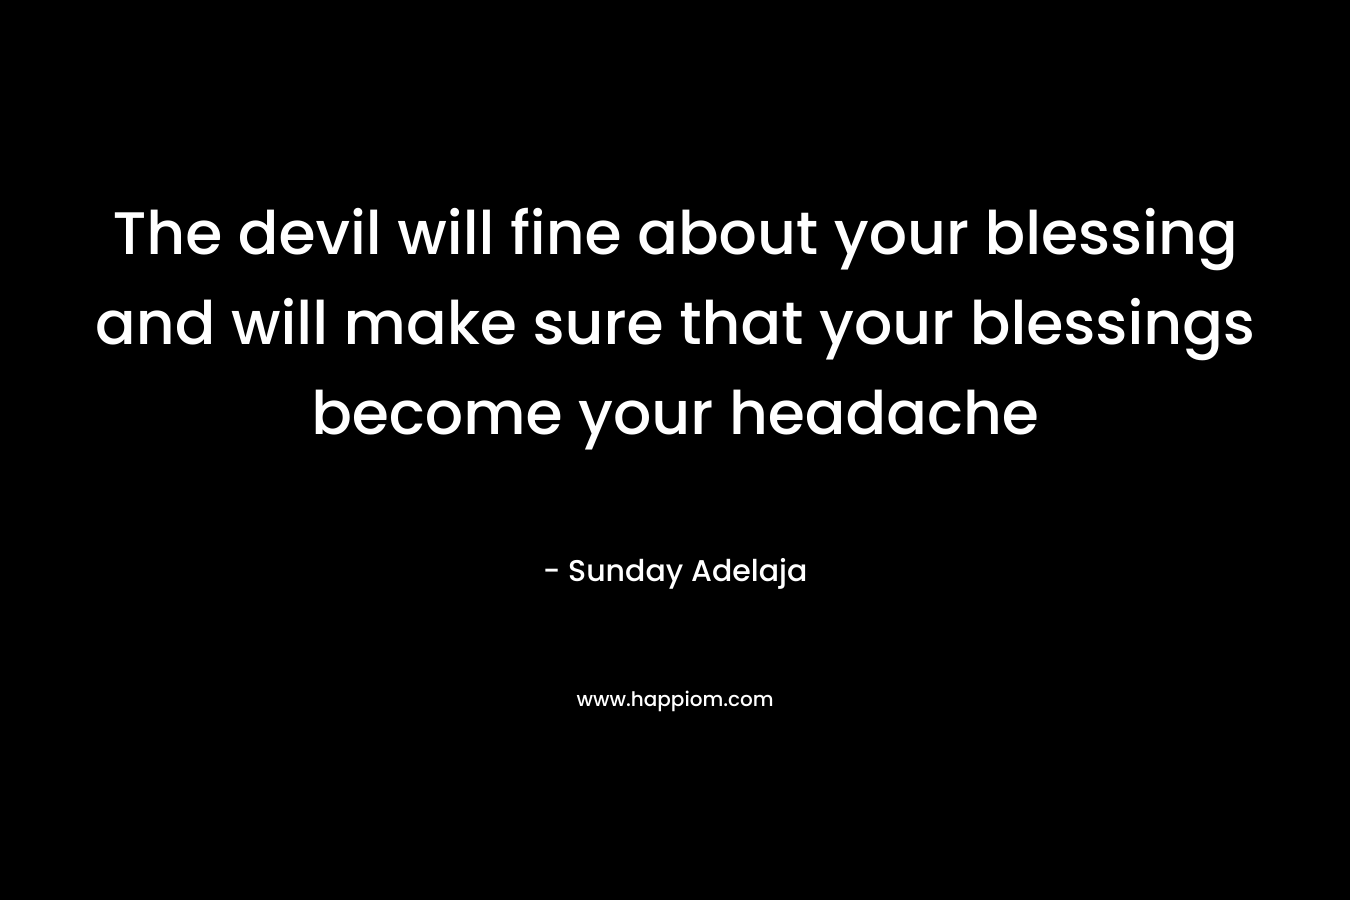 The devil will fine about your blessing and will make sure that your blessings become your headache – Sunday Adelaja